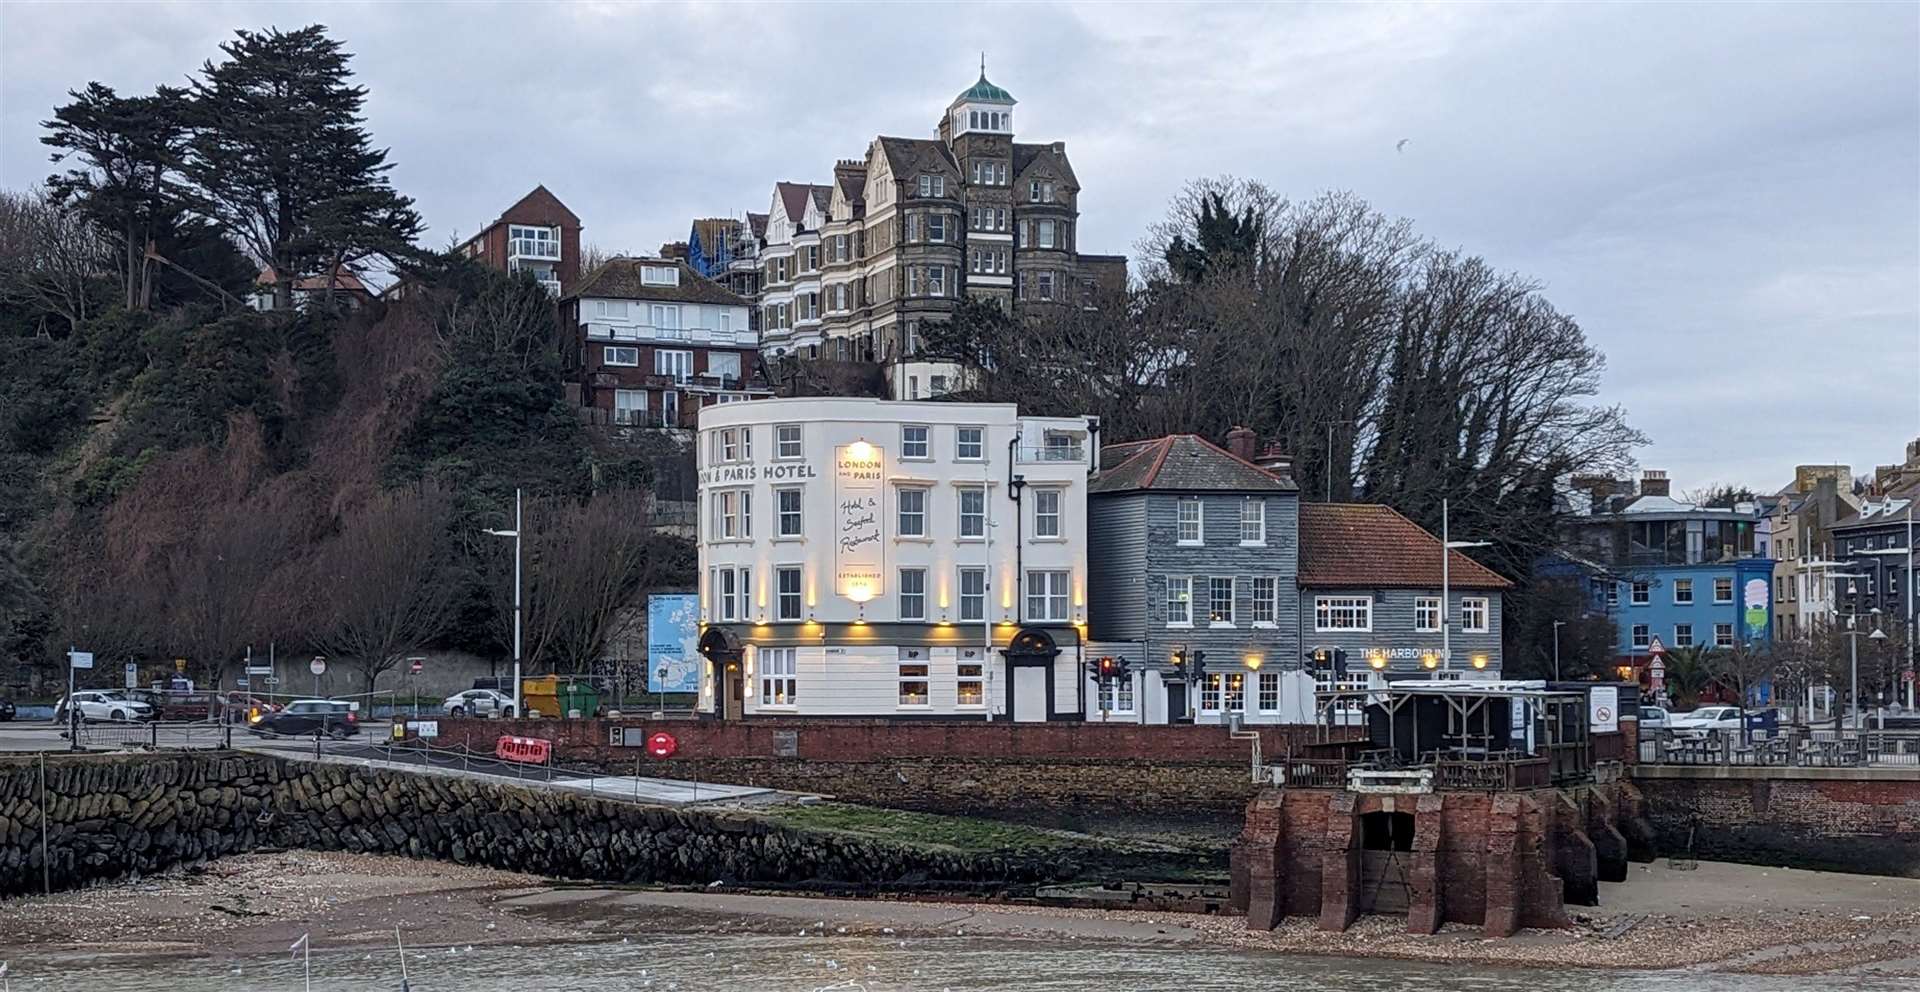 The London and Paris occupies a prime site overlooking Folkestone harbour